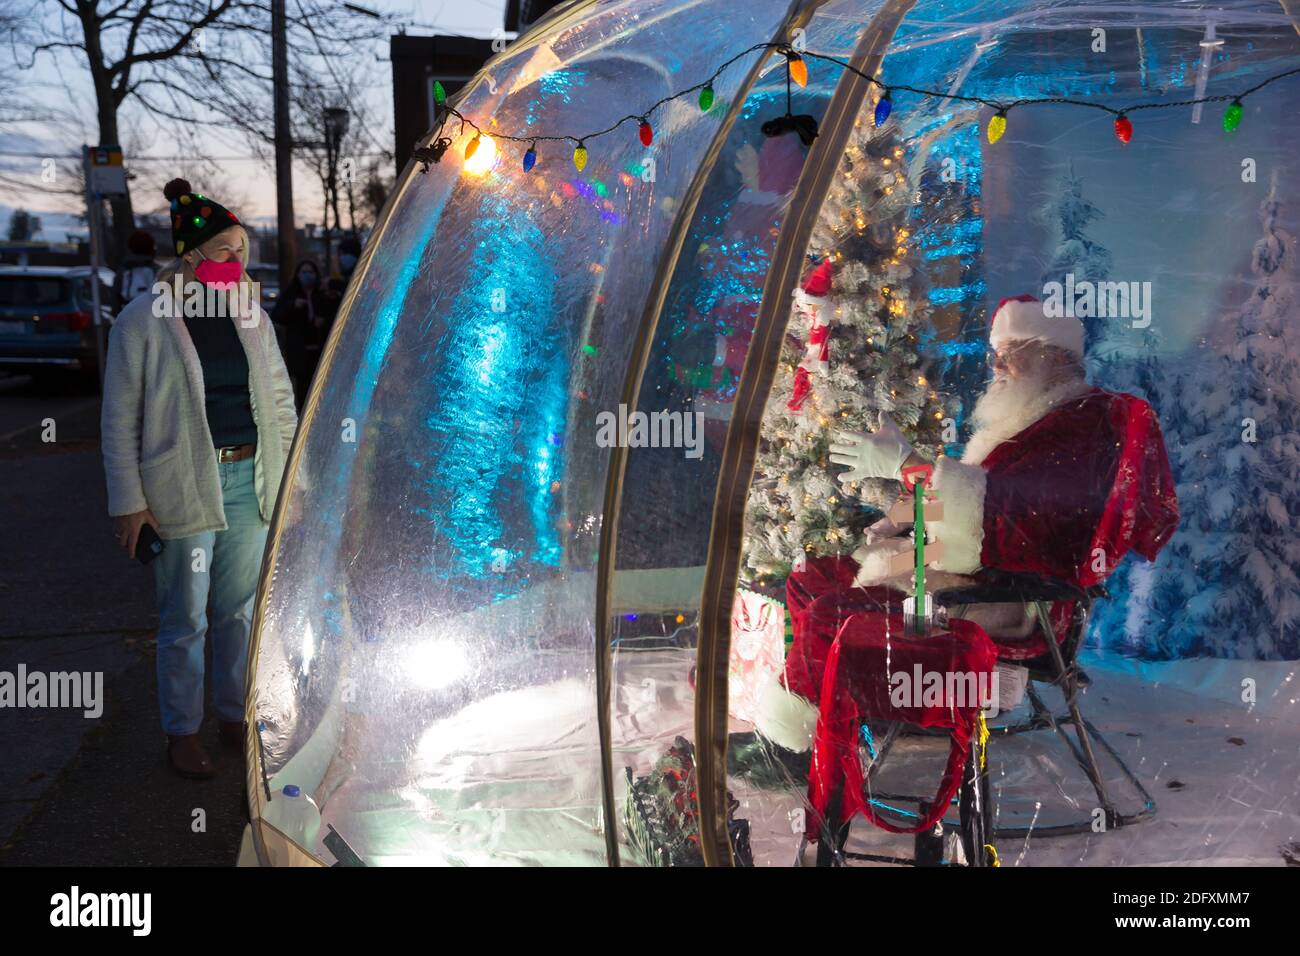 Seattle, Washington, USA. 6th December, 2020. Dan Kemmis, known as the Seattle Santa, chats with Kris Bennett from within a protective plastic bubble in Seattle’s Greenwood neighborhood. Unable to schedule private events due to the coronavirus pandemic, Kemmis is making physically distanced public appearances with some donations benefiting local homeless shelters. Credit: Paul Christian Gordon/Alamy Live News Stock Photo